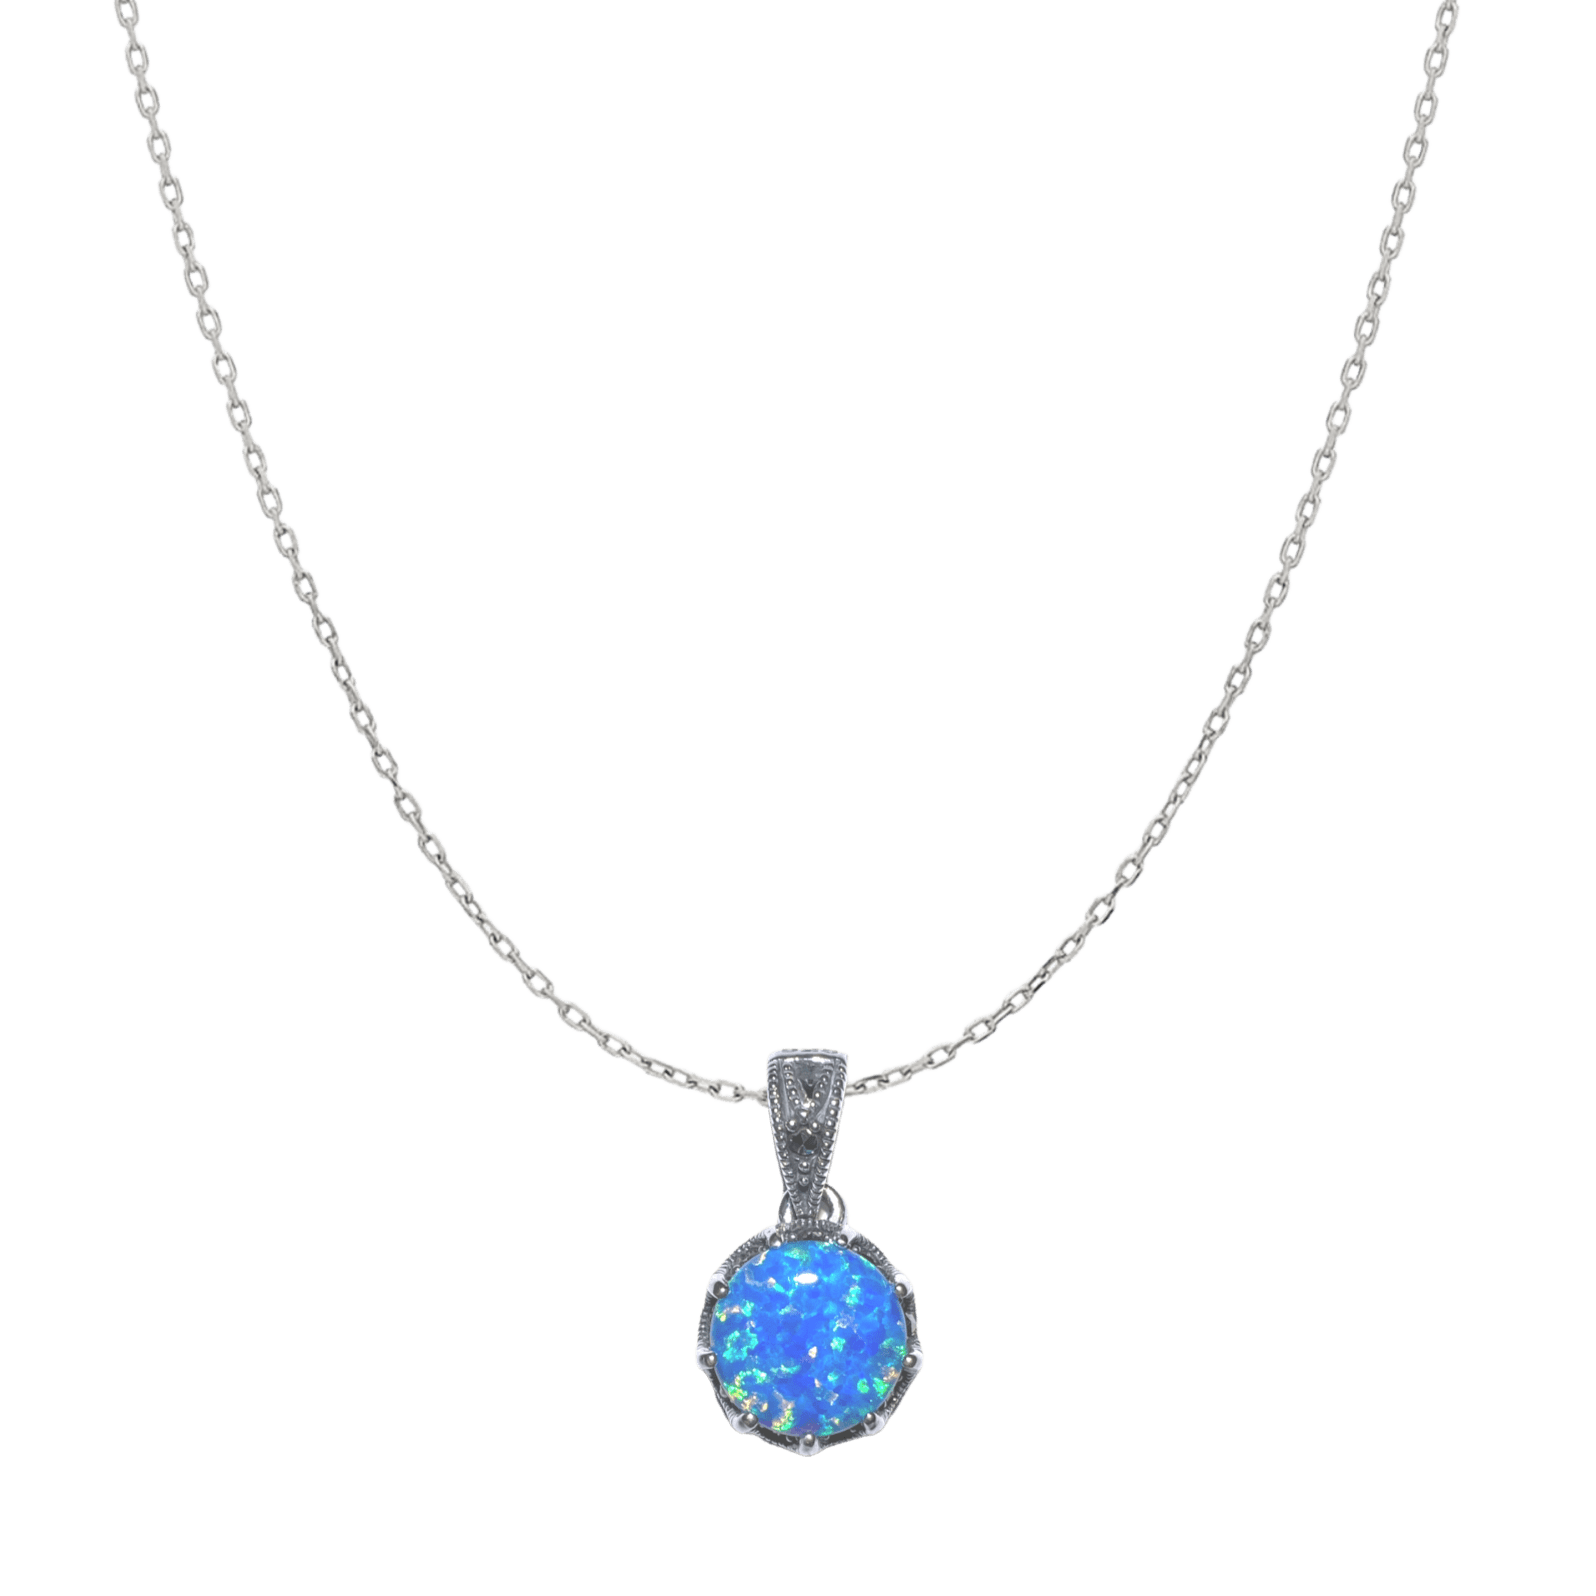 Spero London Women's Circle High Quality Opal Sterling Silver Pendant Necklace - Blue